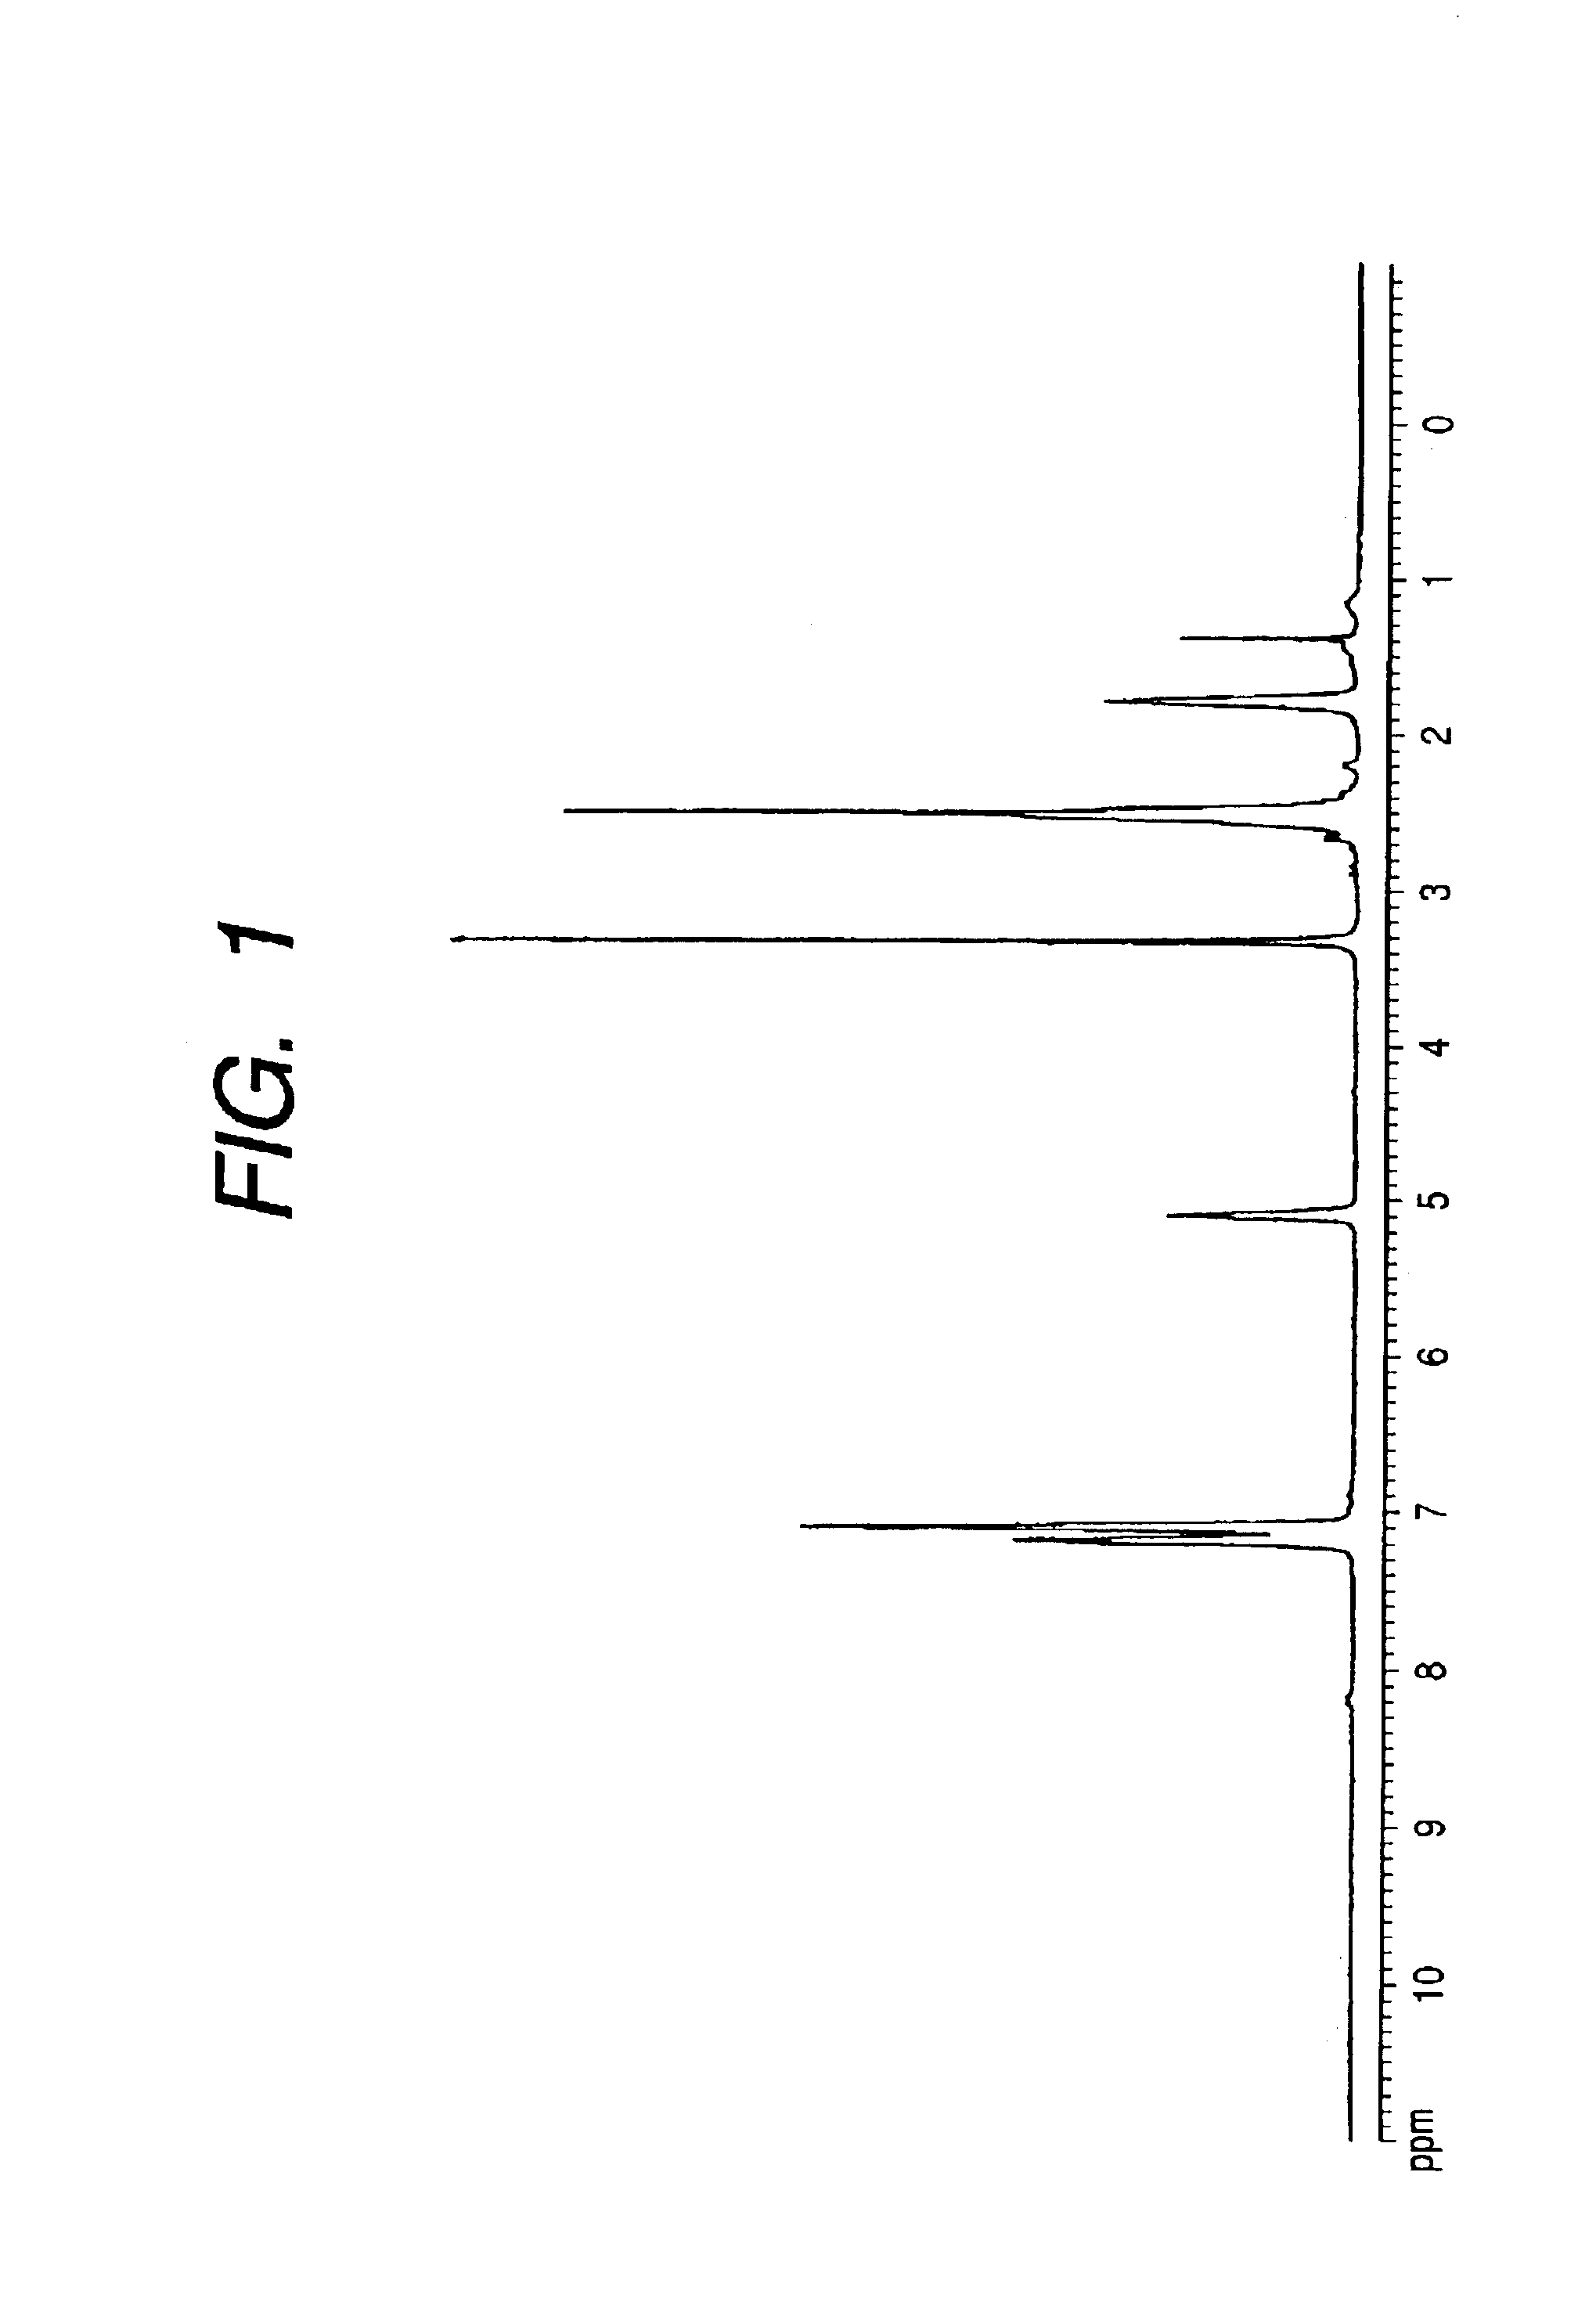 Polyhydroxyalkanoate having amide group and sulfonic group, method of producing the same, charge controlling agent containing novel polyhydroxyalaknaote, toner binder, toner, and image forming apparatus using the toner